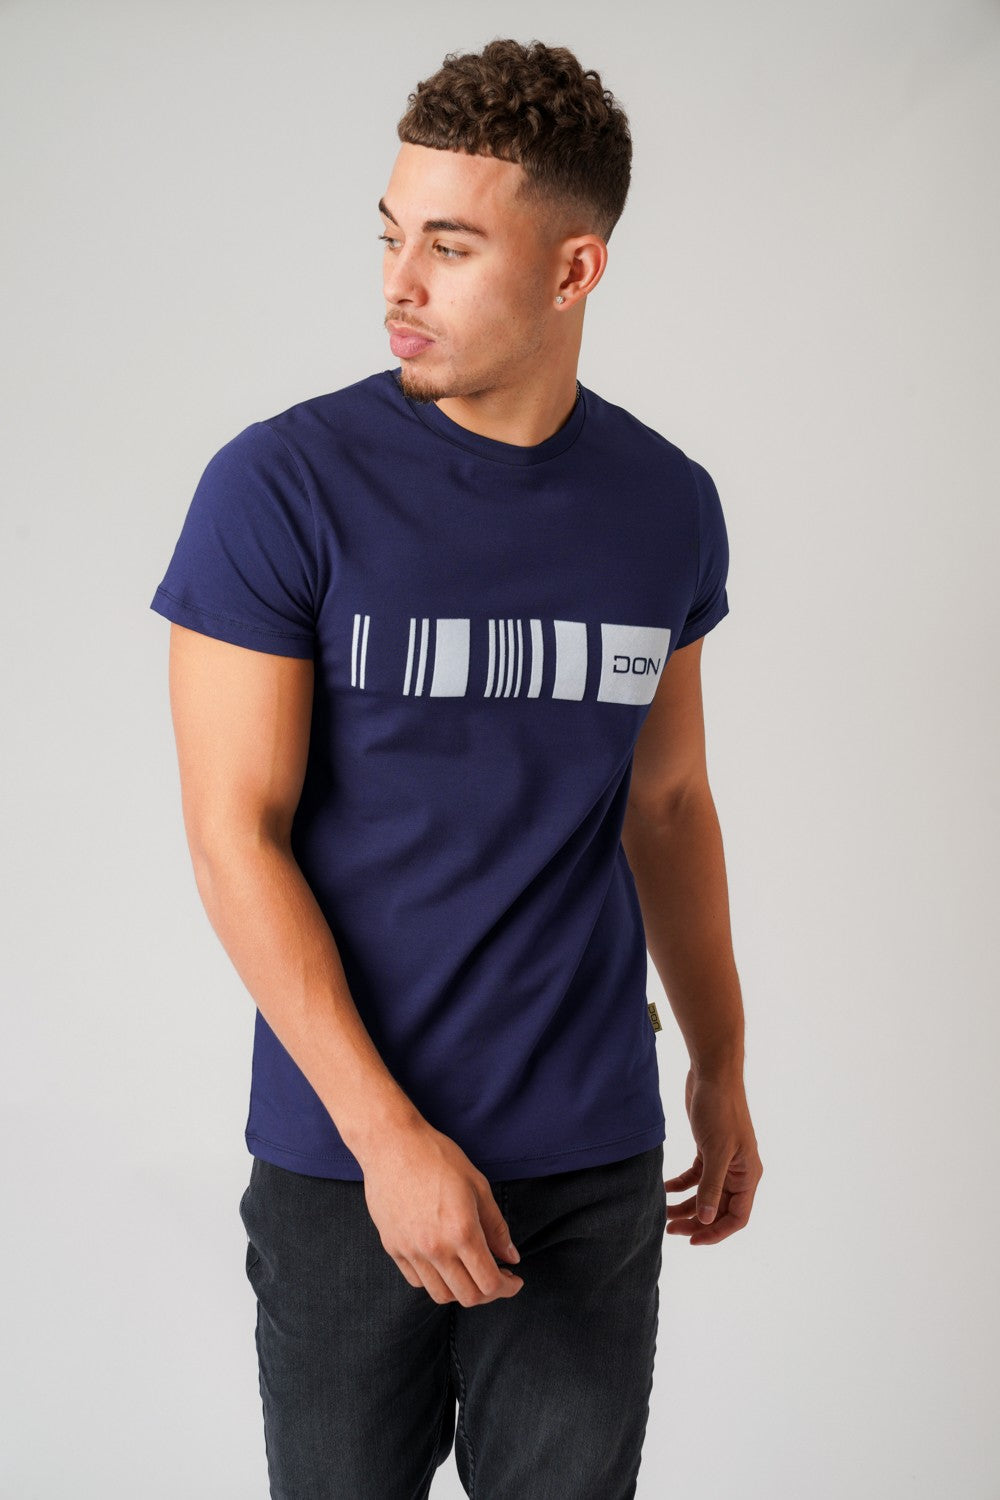 SUEDE BARCODE NAVY T-SHIRT